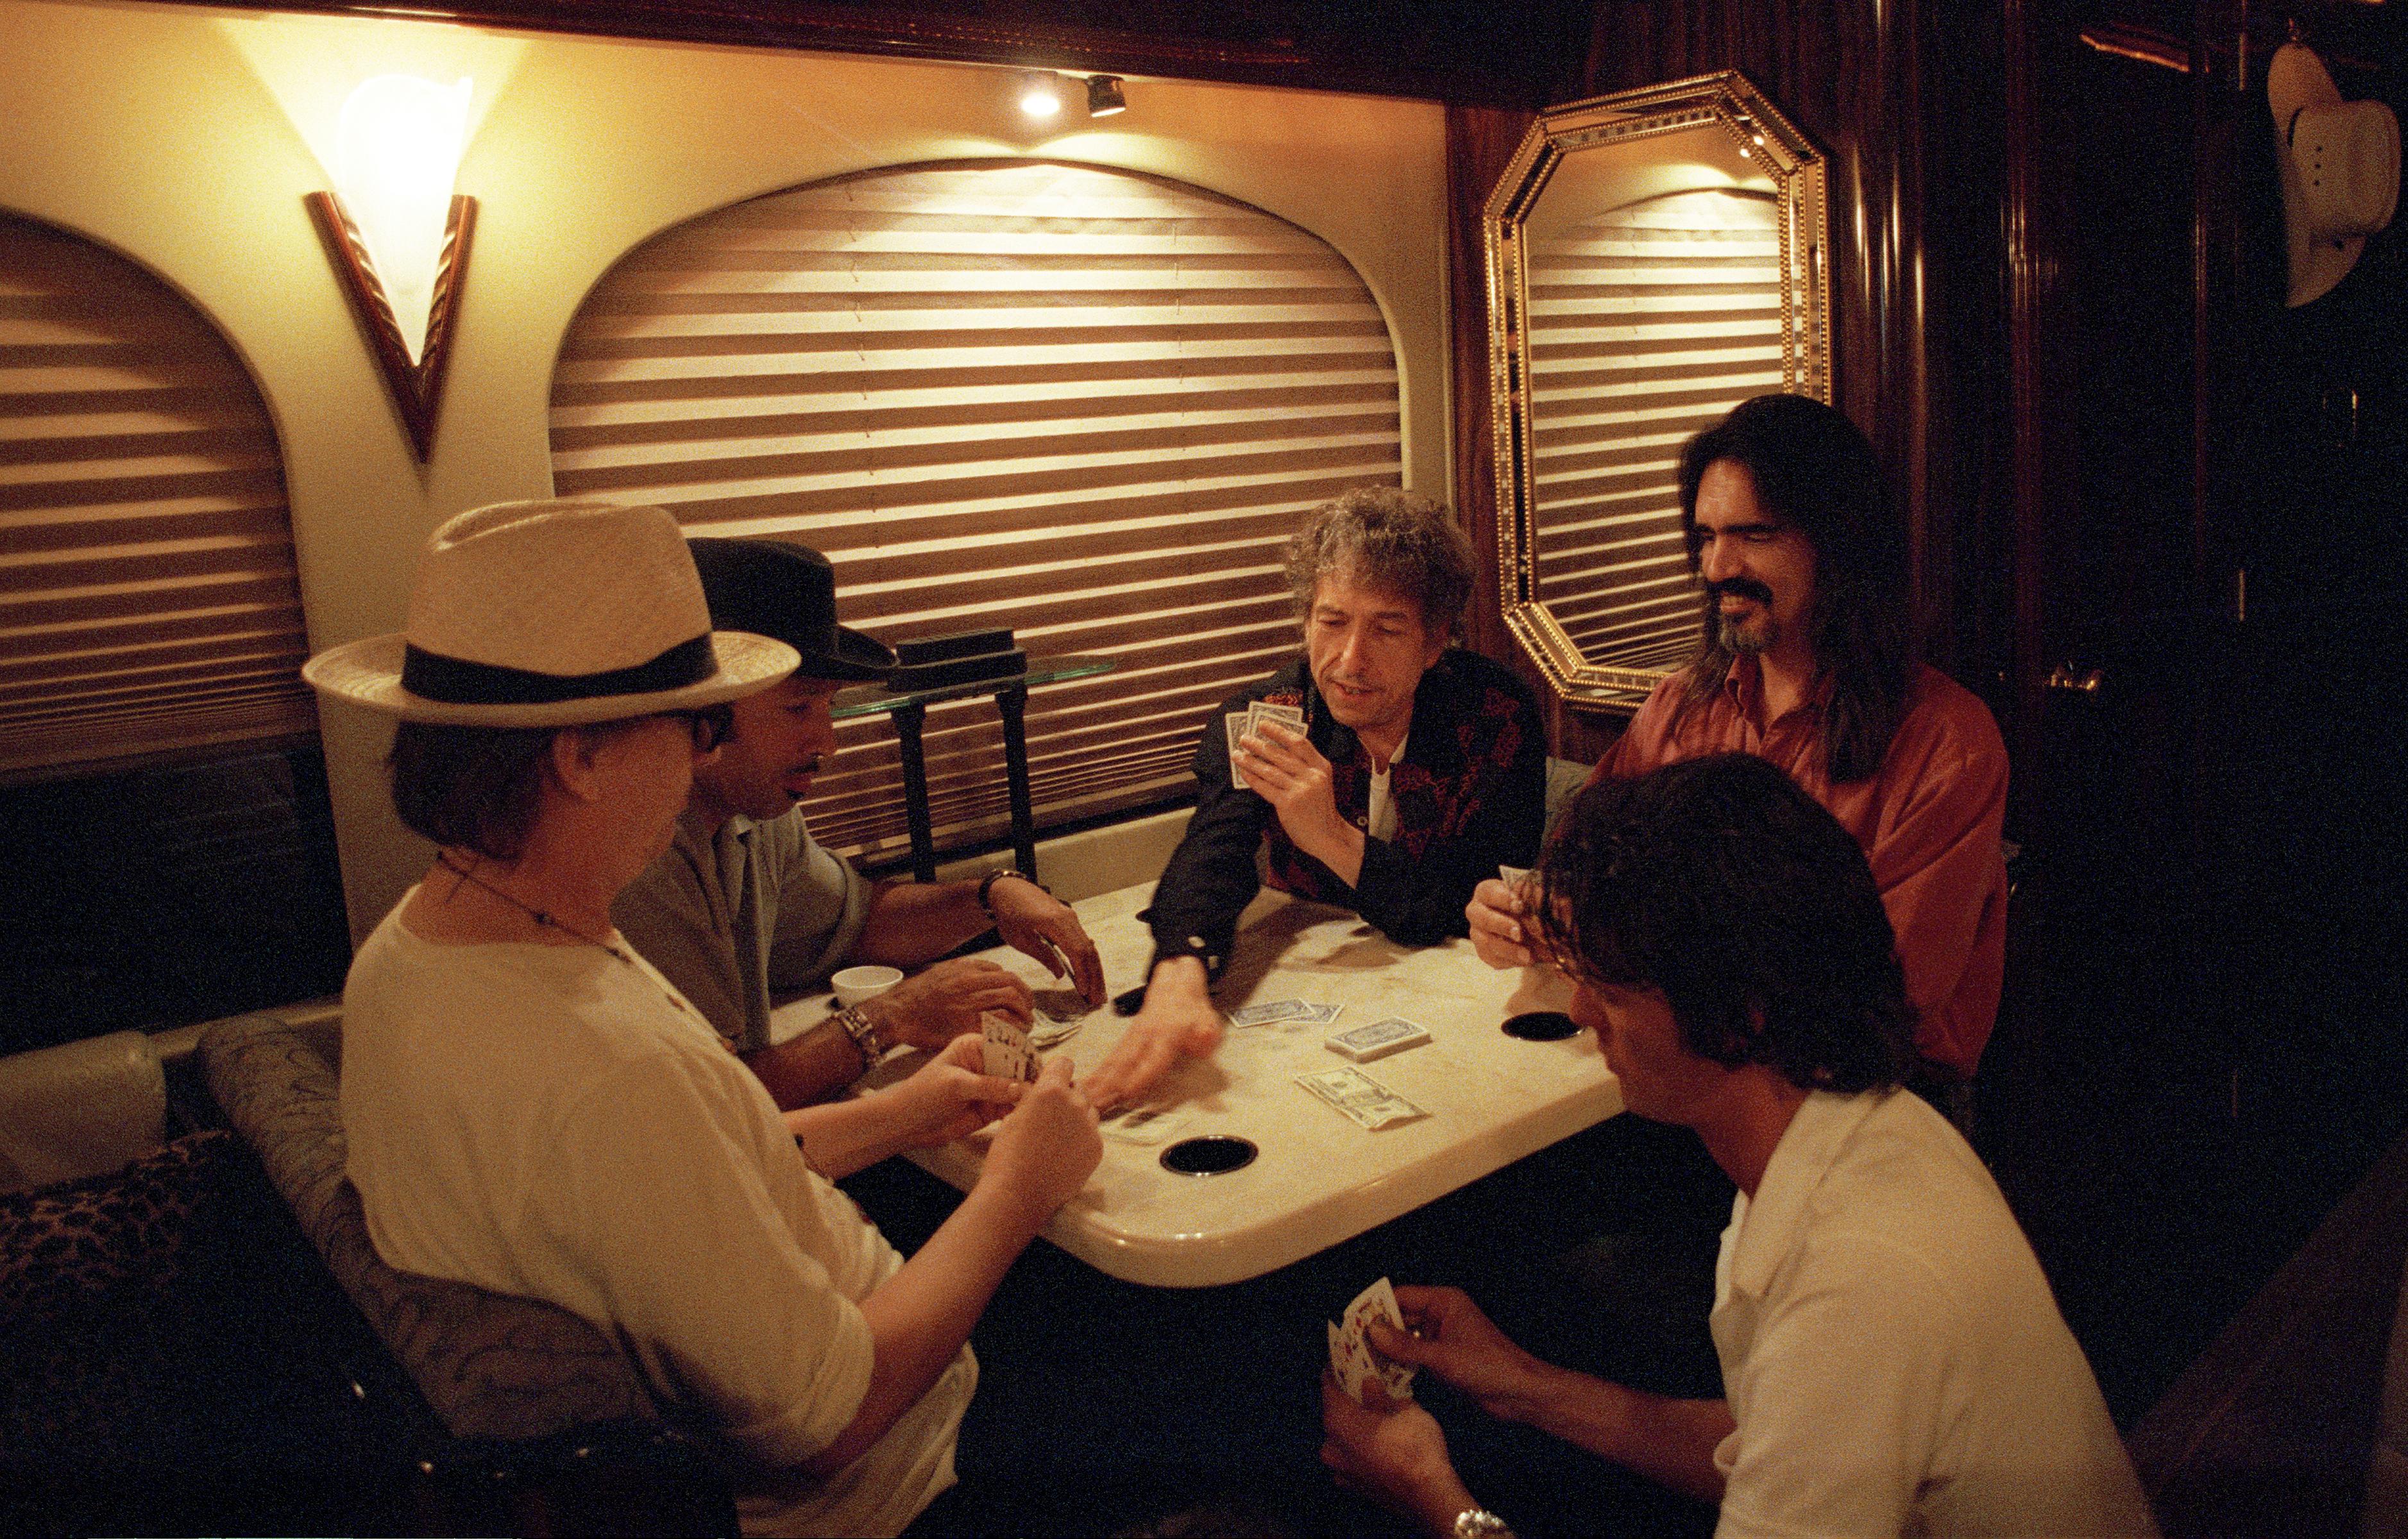 Ken Regan Color Photograph - Bob Dylan and the band playing poker on the bus, 2001